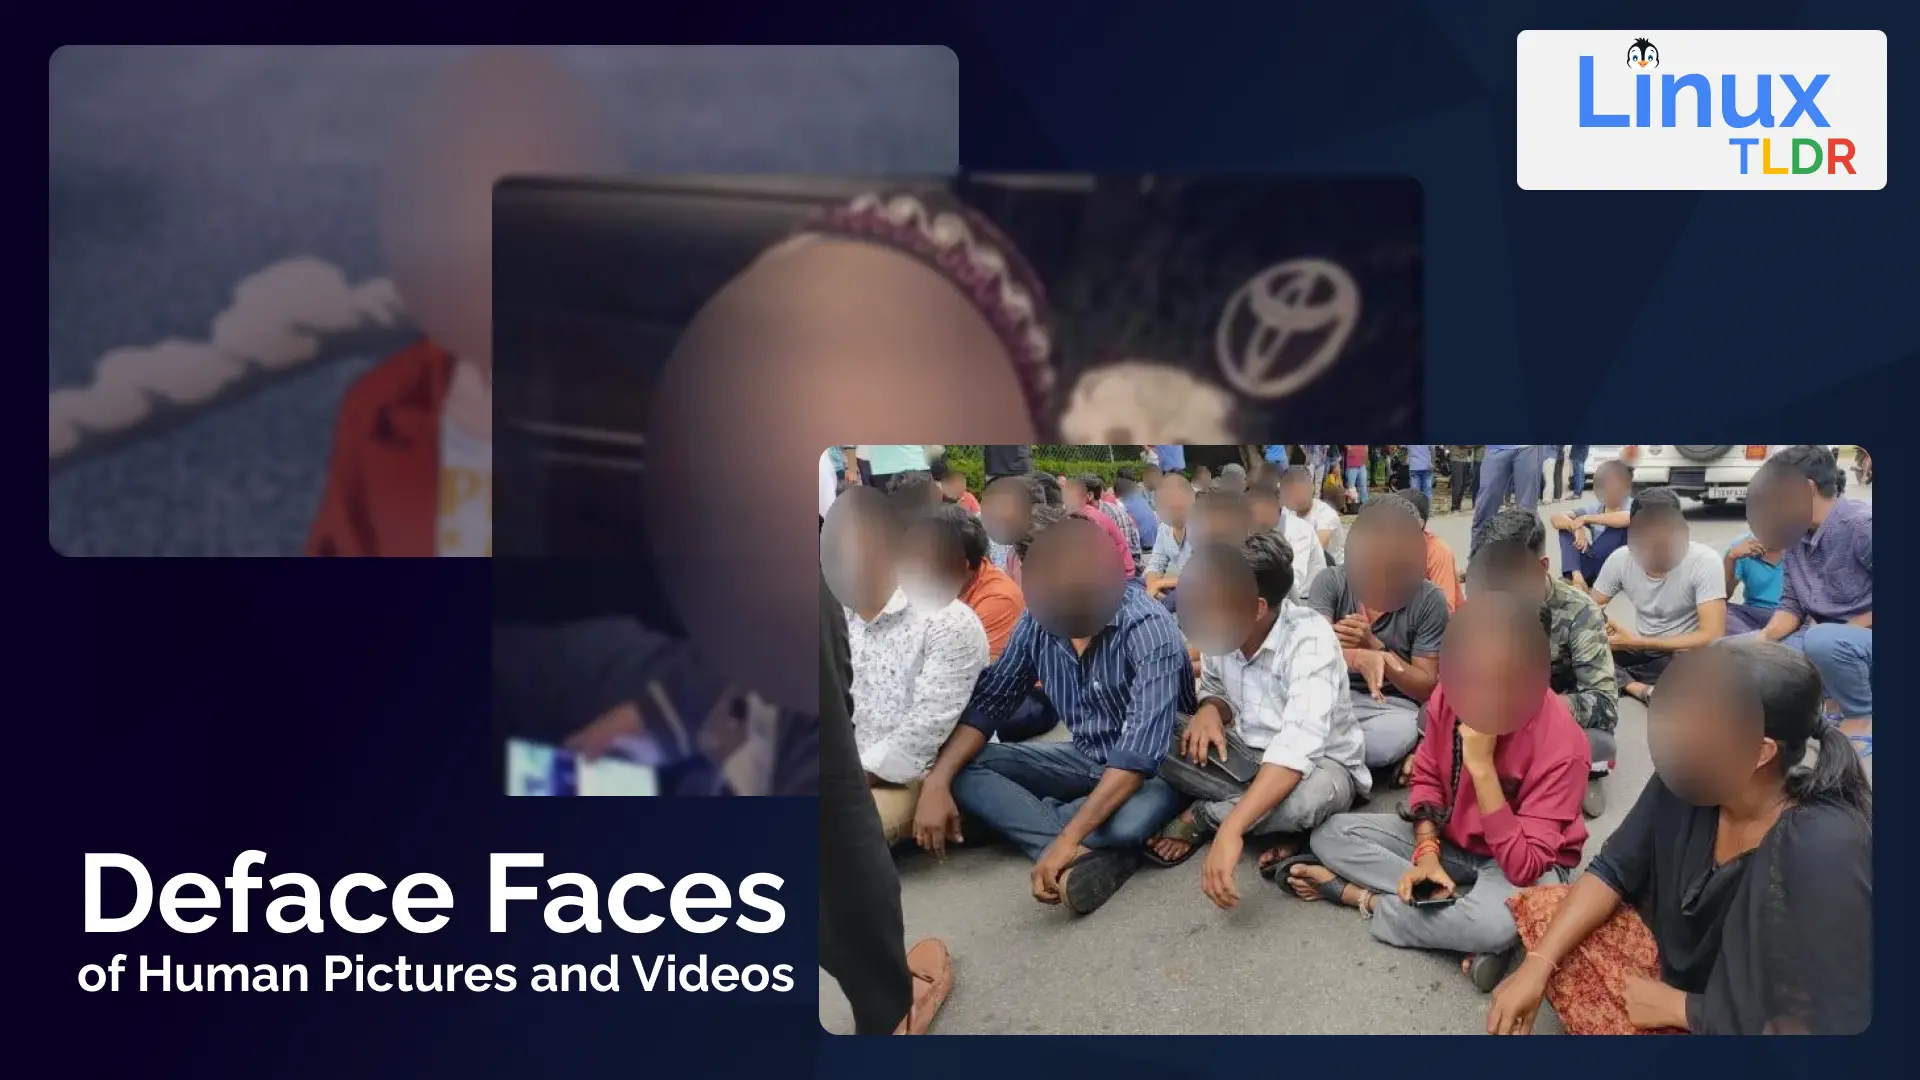 defaces faces of human pictures and videos